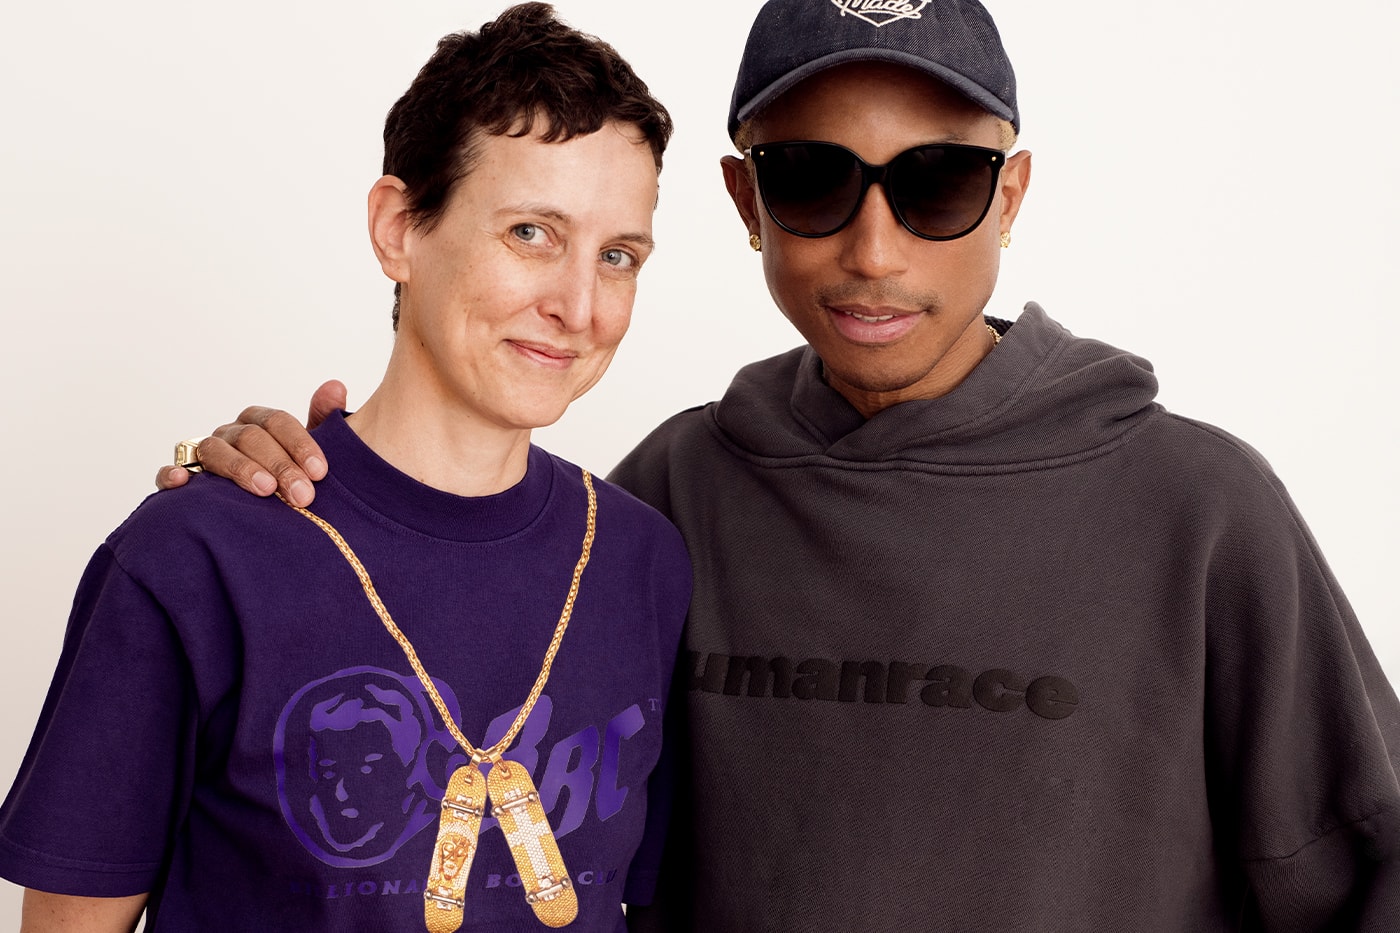 Pharrell's JOOPITER Announces 'Just Phriends' Auction With Colette Founder Sarah Andelman paris fashion week Takashi Murakami’s “Simple Things,” and pieces from artists including KAWS, Daniel Arsham, Futura, JR, Paola Pivi, Invader, Xavier Veilhan, MSCHF, Chanel, Tiffany & Co., Louis Vuitton, Richard Mille and Jean-Charles de Castelbajac